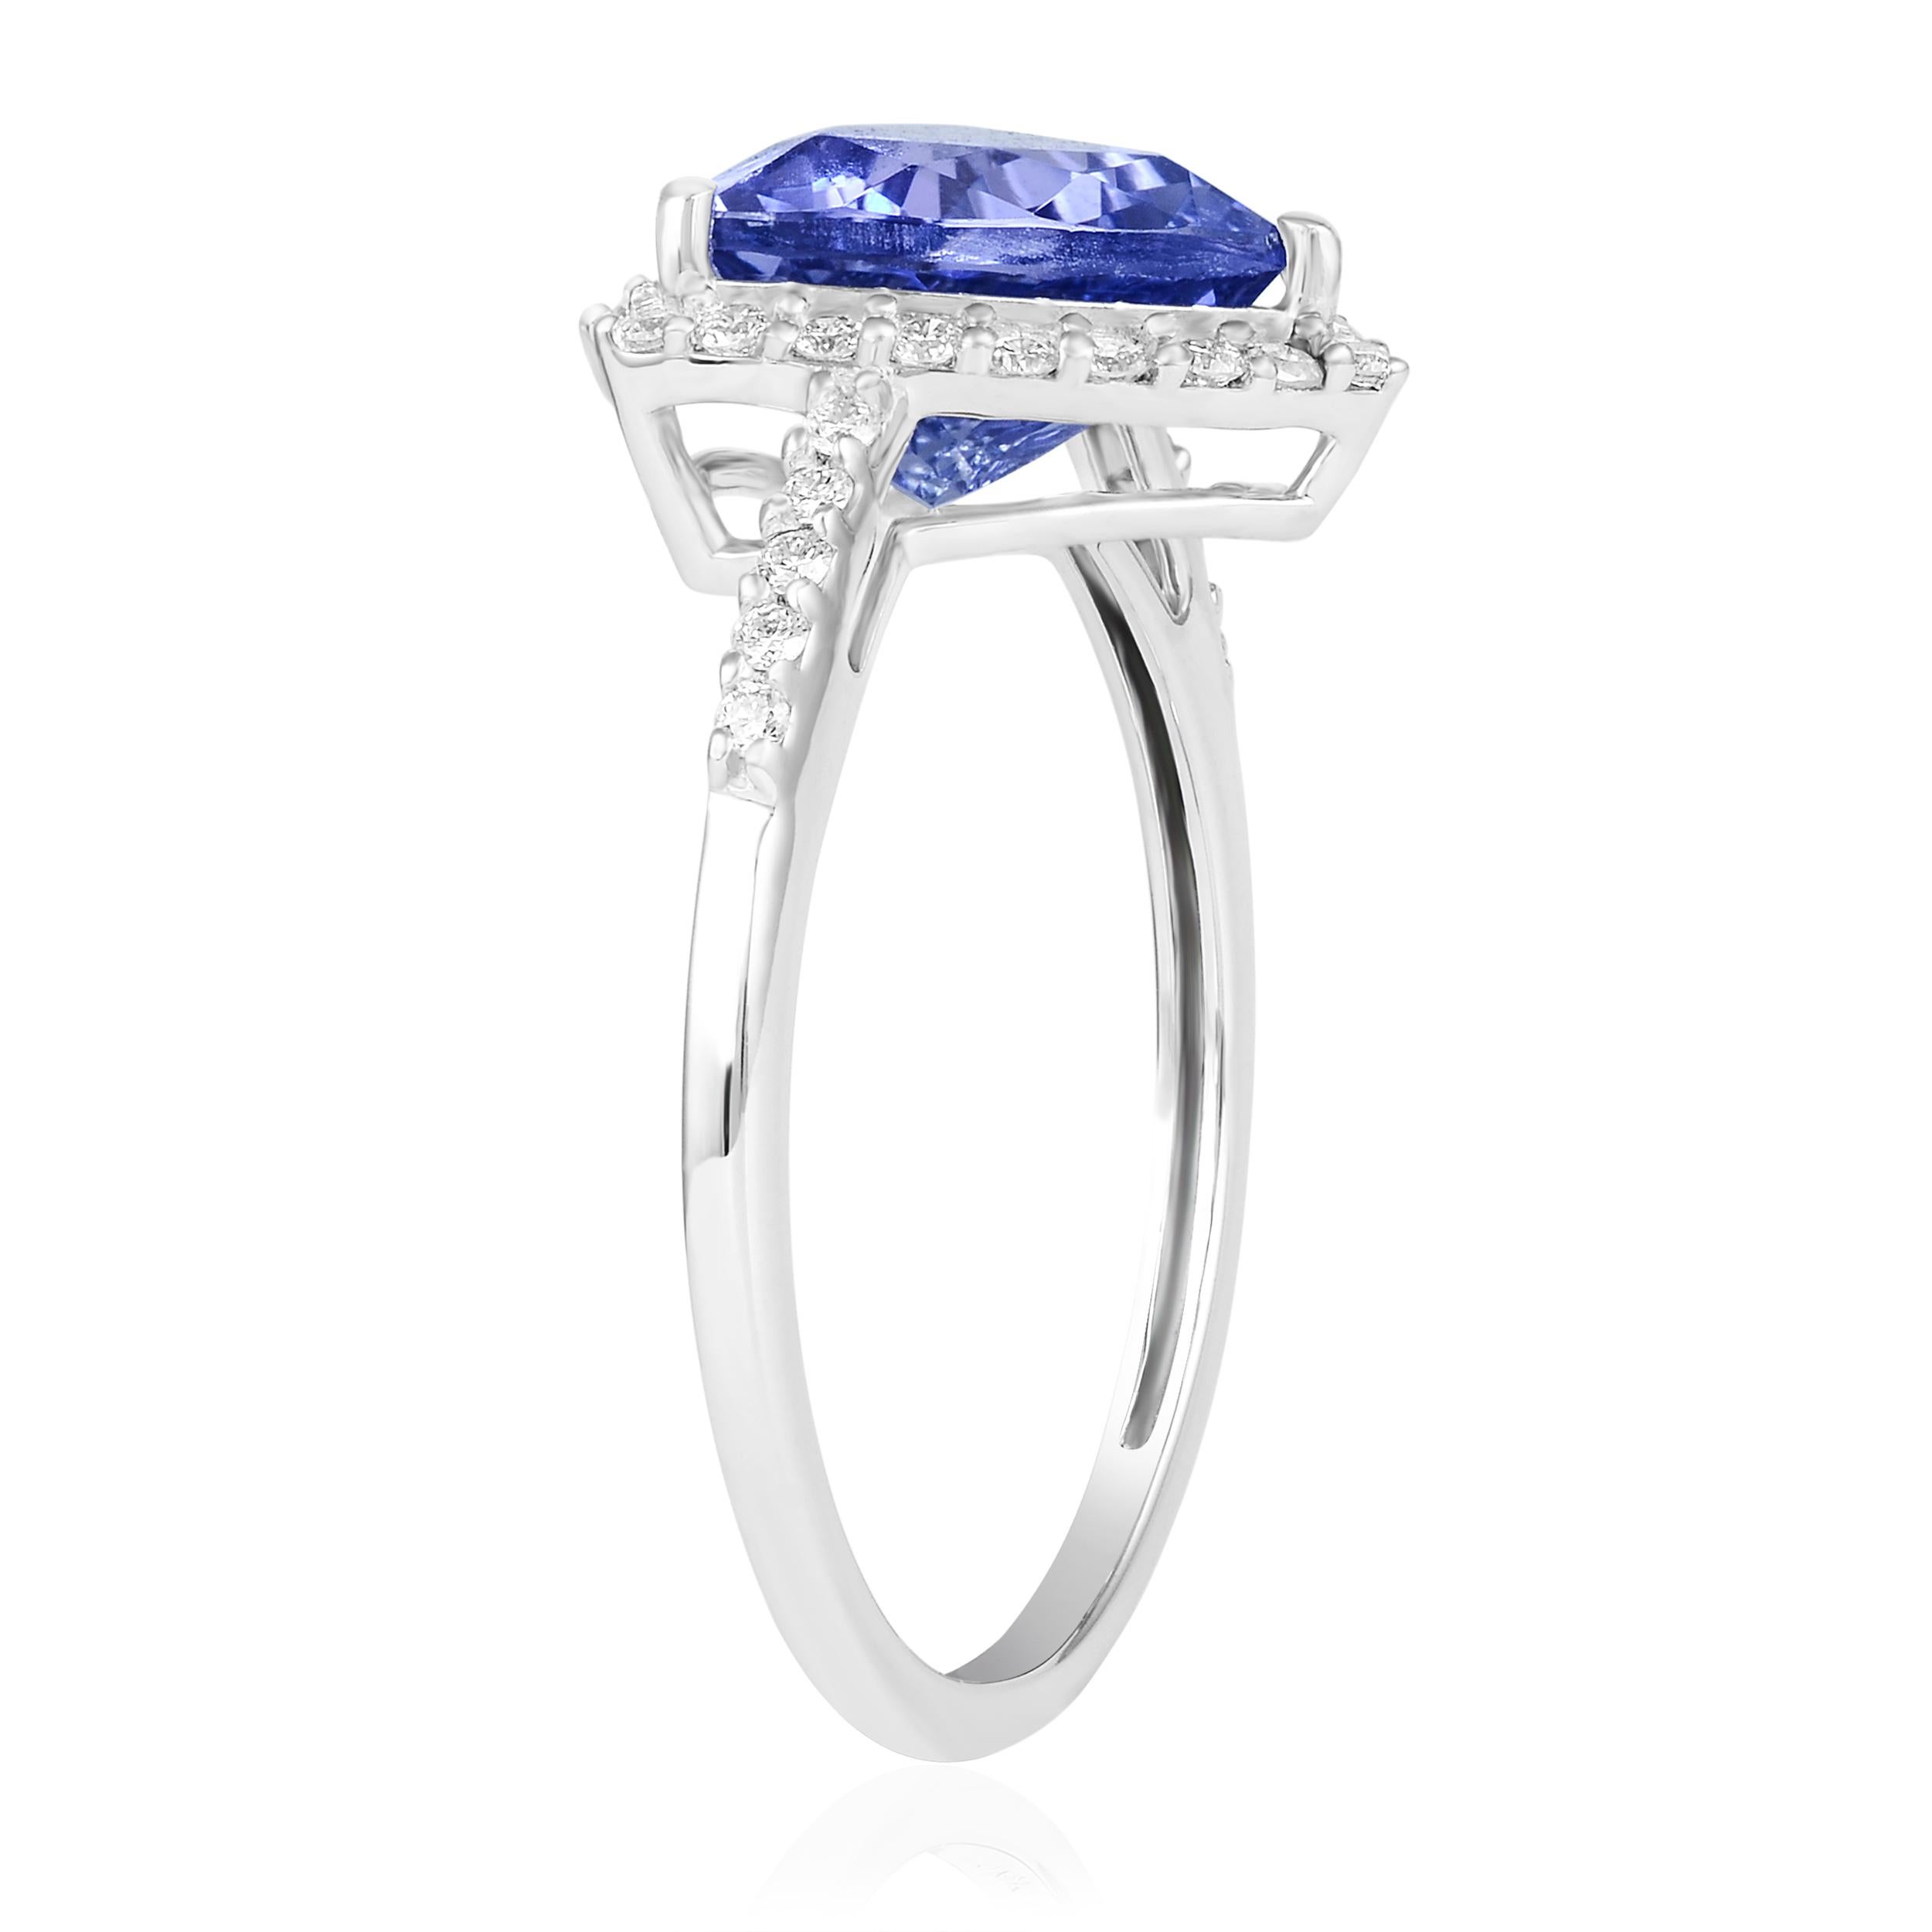 Indulge in the celestial beauty of the night sky with our exquisite ring from 